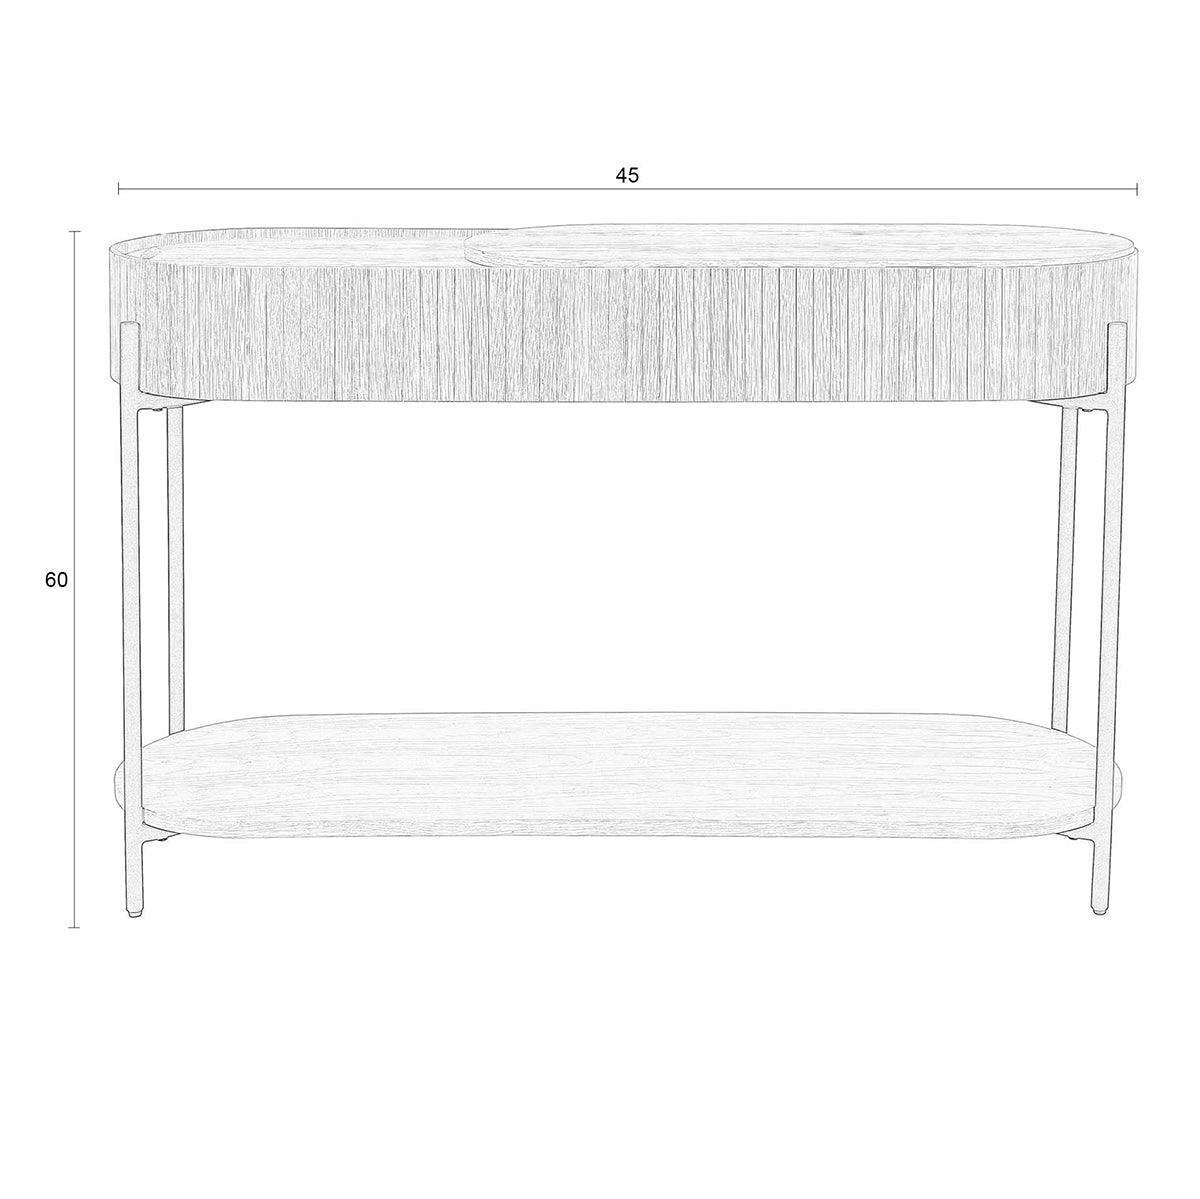 Slides Natural Console Table - WOO .Design